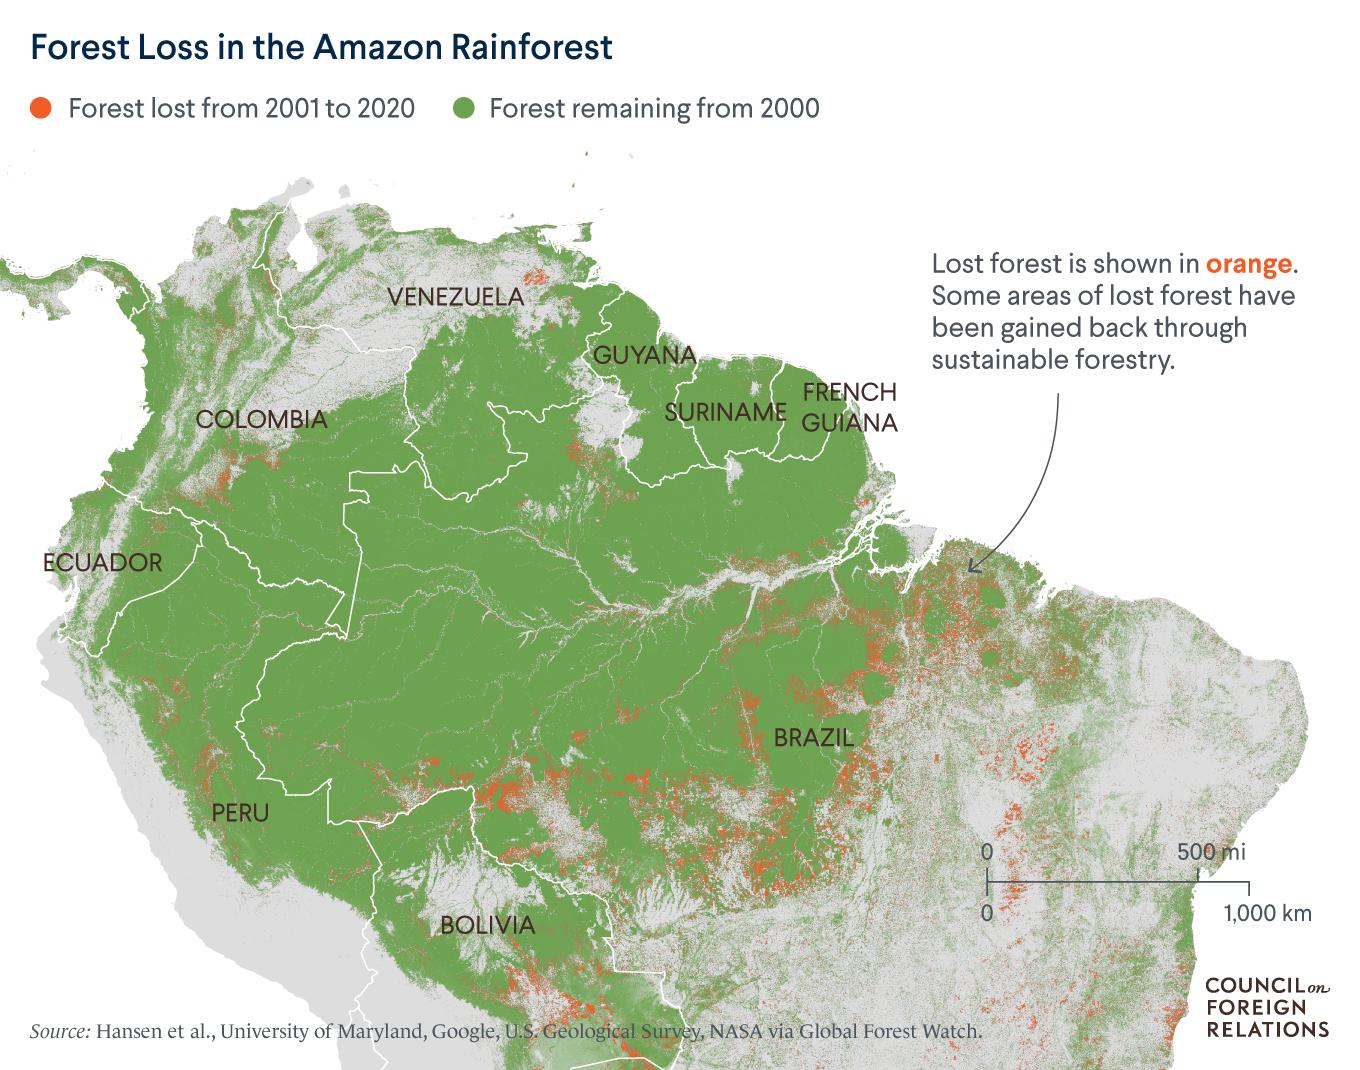 Deforestation in Asia: a call for conservation